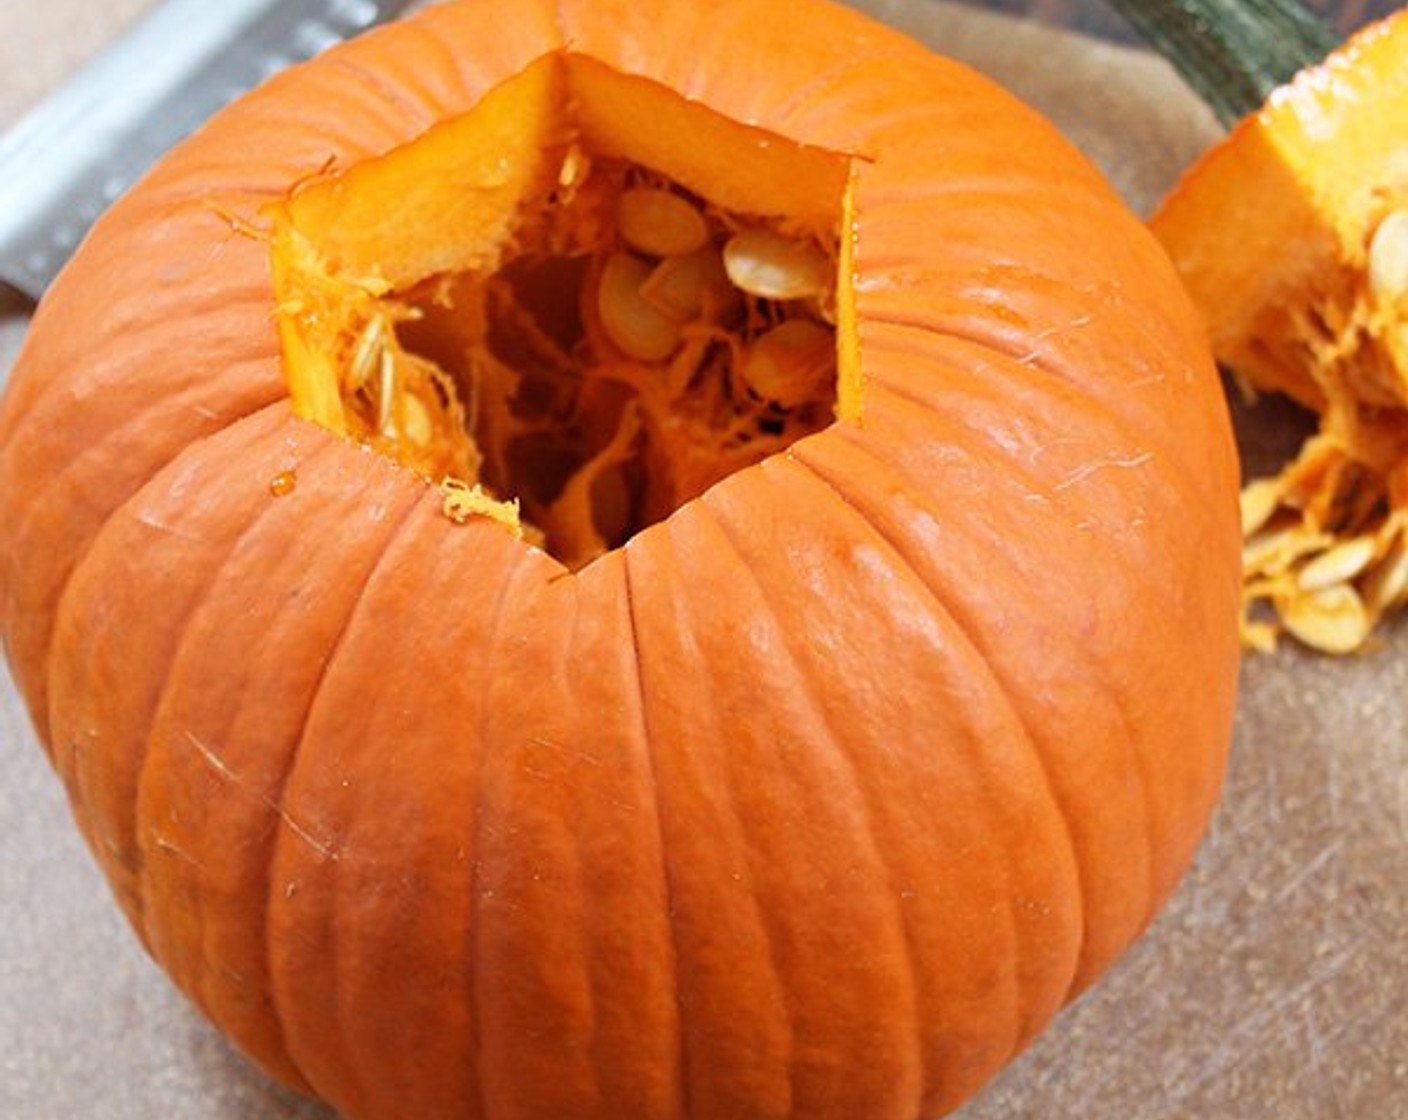 step 4 Prep your Pumpkin (1). Make vertical cuts around the stem and remove it as you would for a jack-o-lantern. Carefully cut the pumpkin in half lengthwise and, using a spoon, remove the seeds and pulp. Save the seeds for the optional maple-roasted pumpkin seeds, or discard.